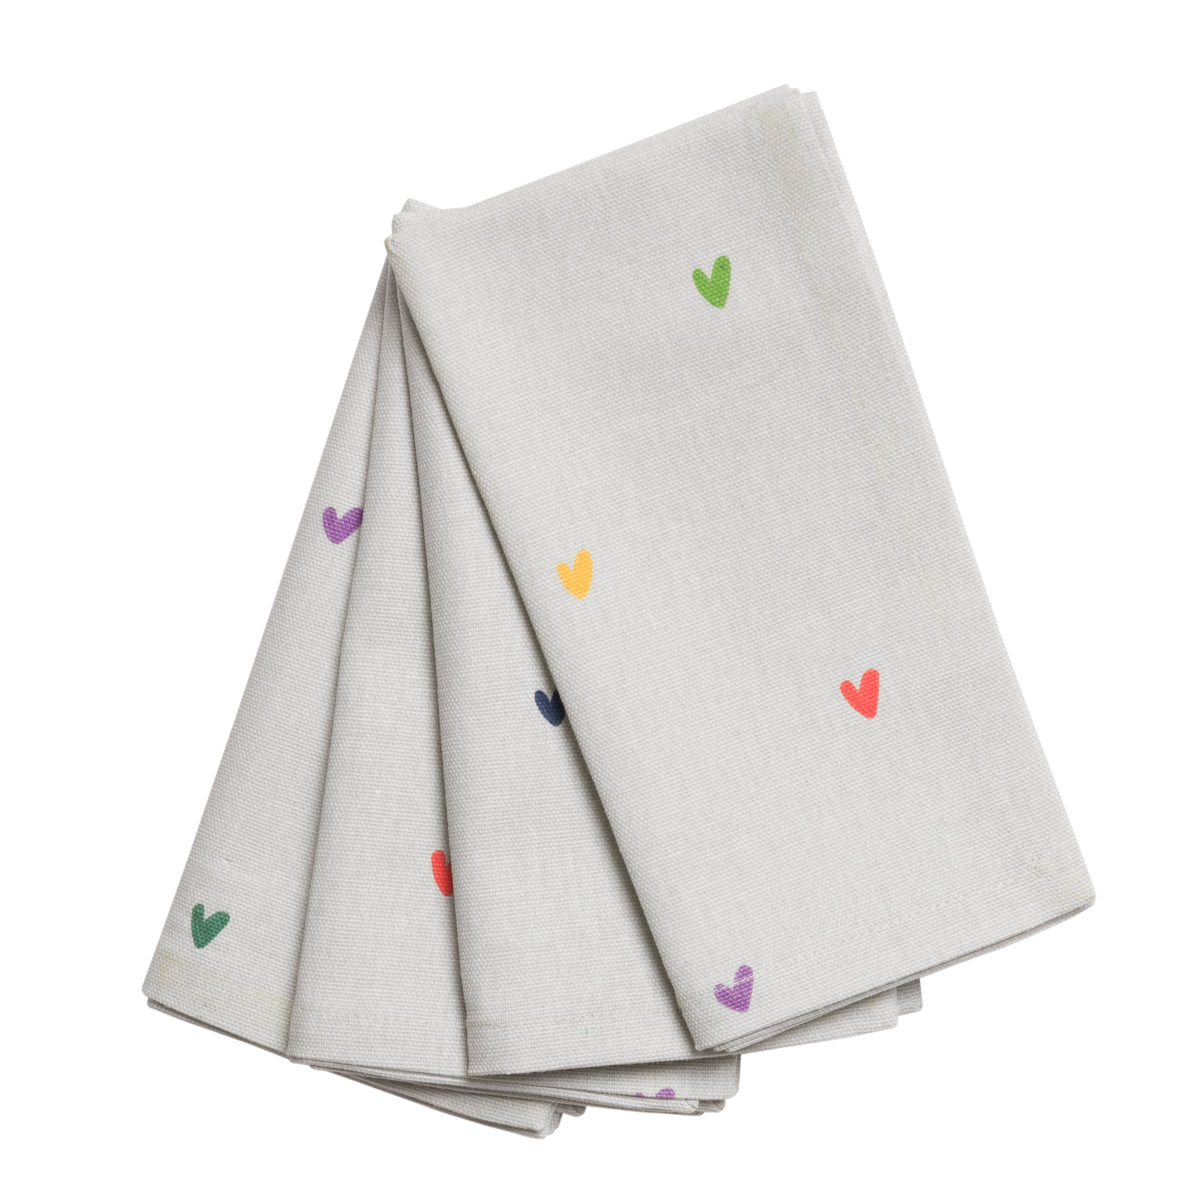 Multicoloured Hearts Napkins (Set of 4) by Sophie Allport